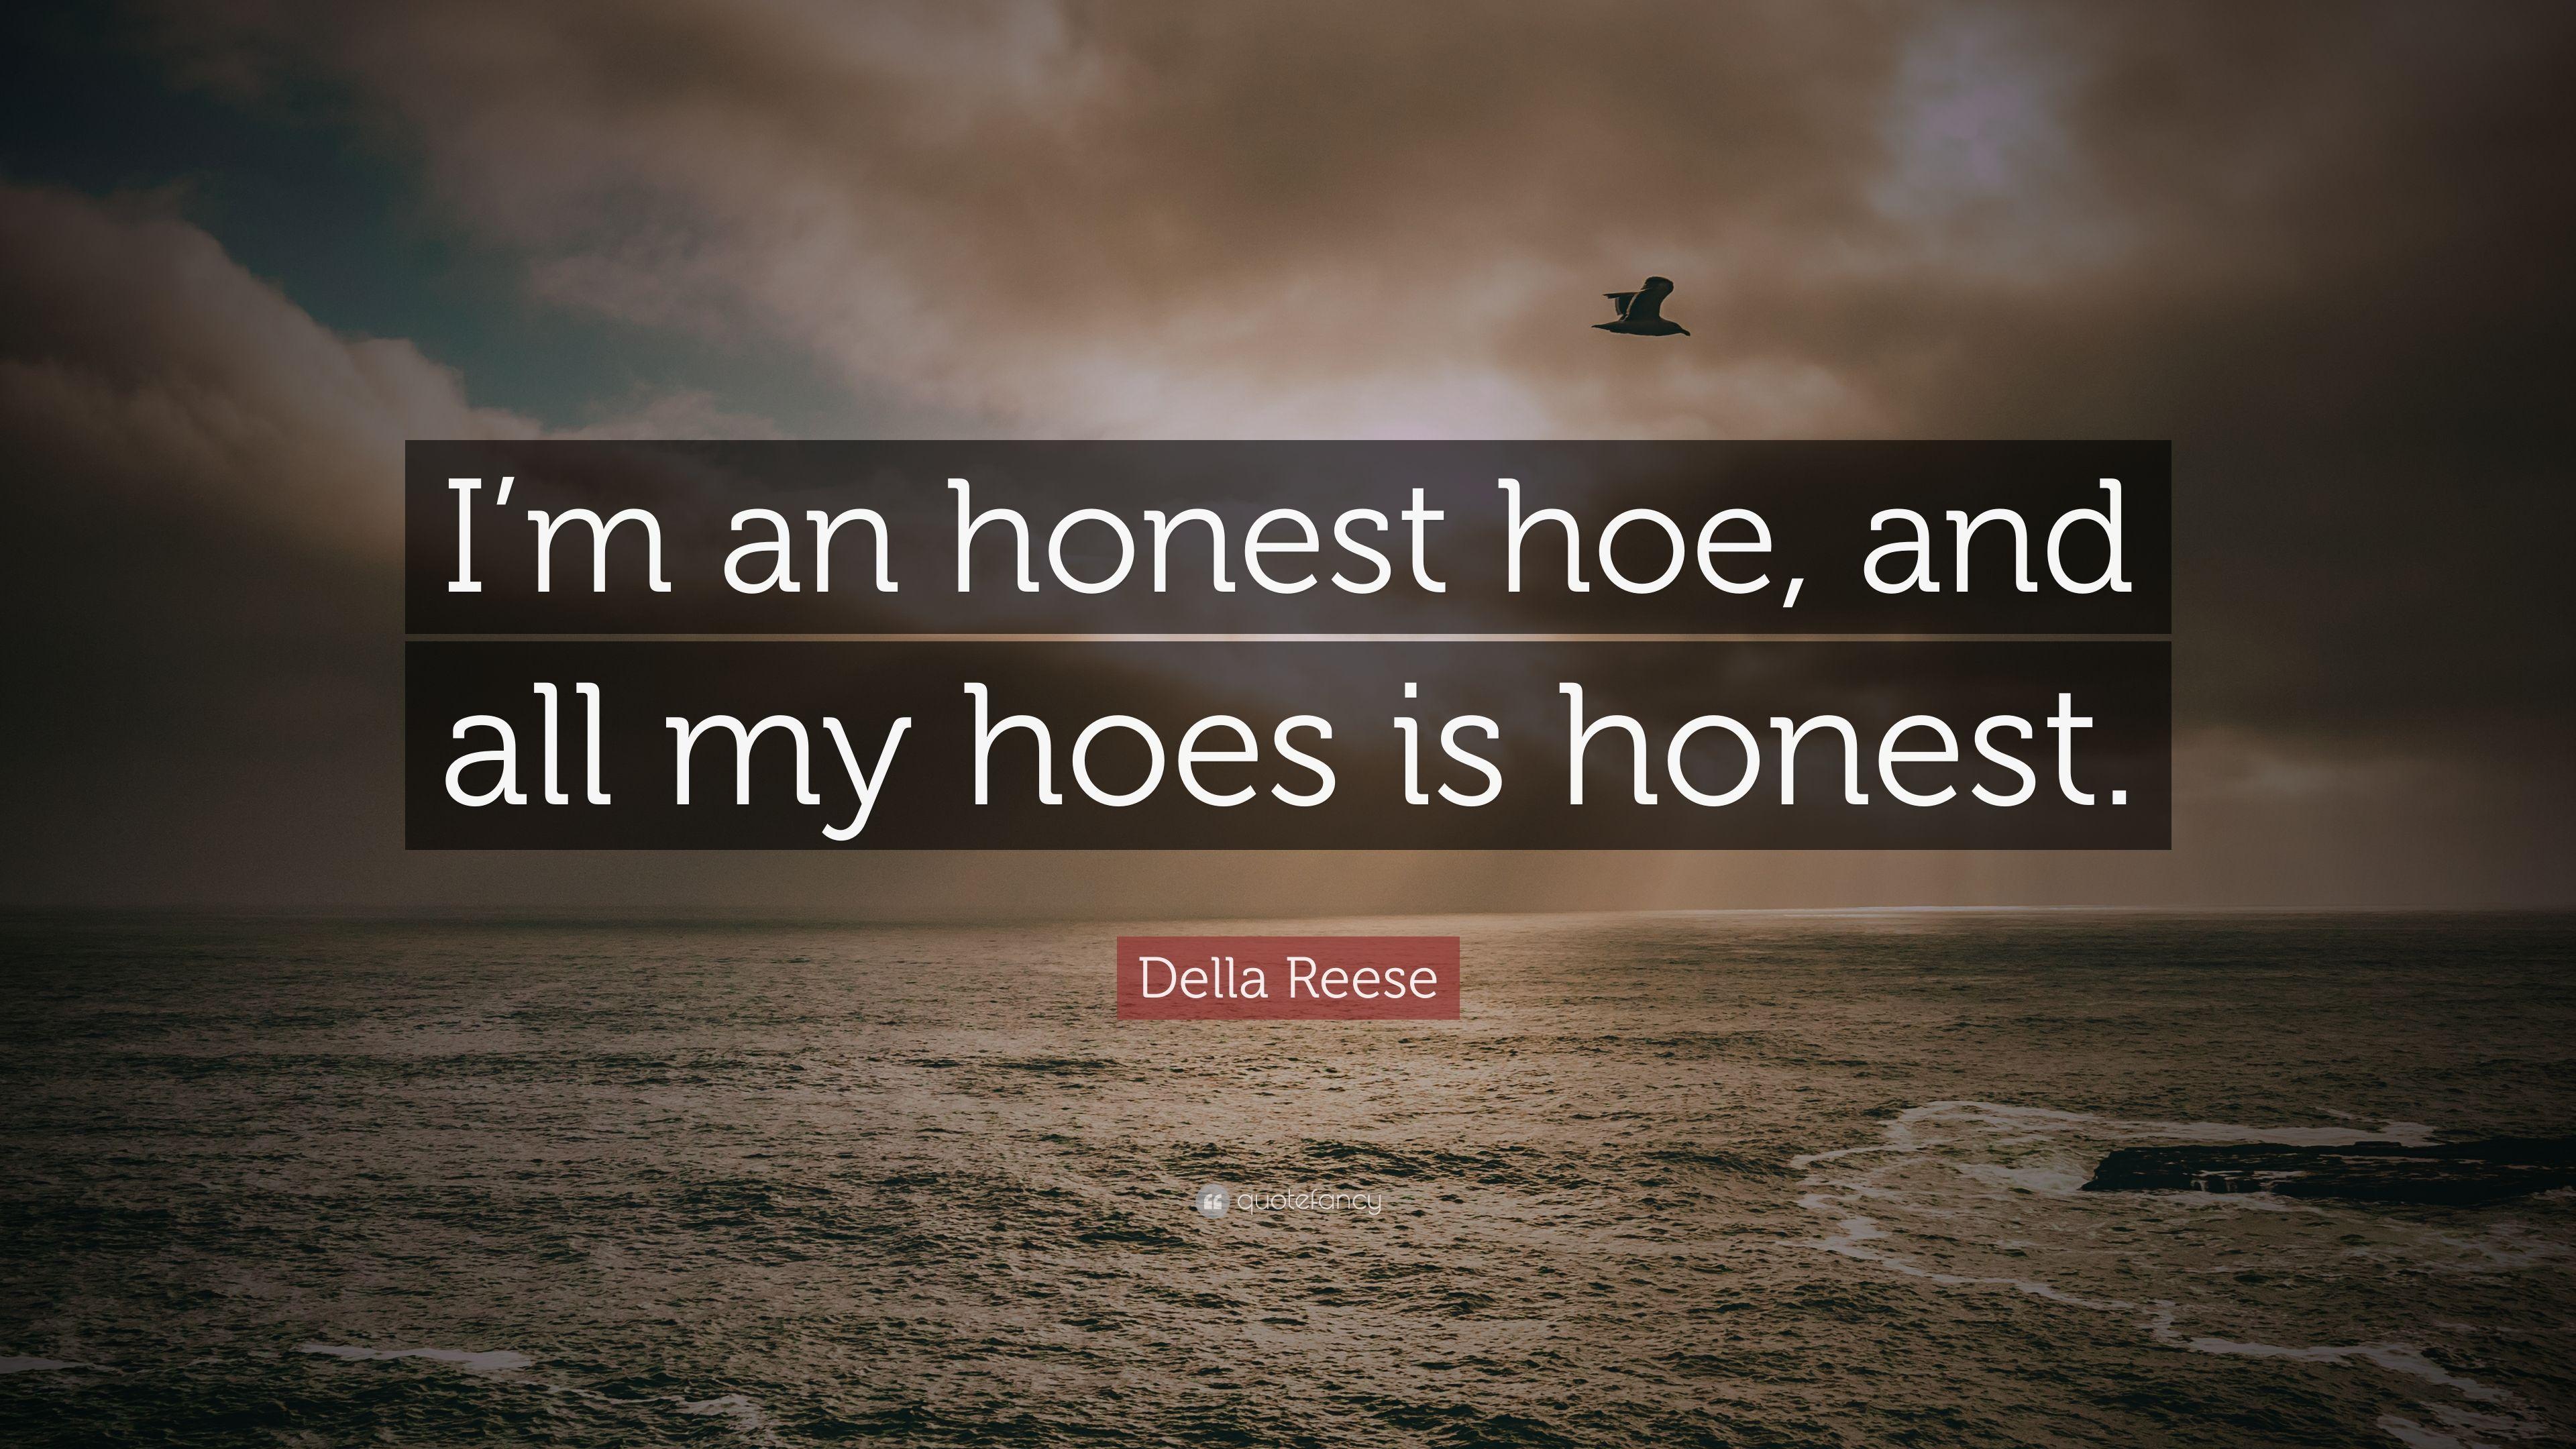 Della Reese Quote: “I'm an honest hoe, and all my hoes is honest